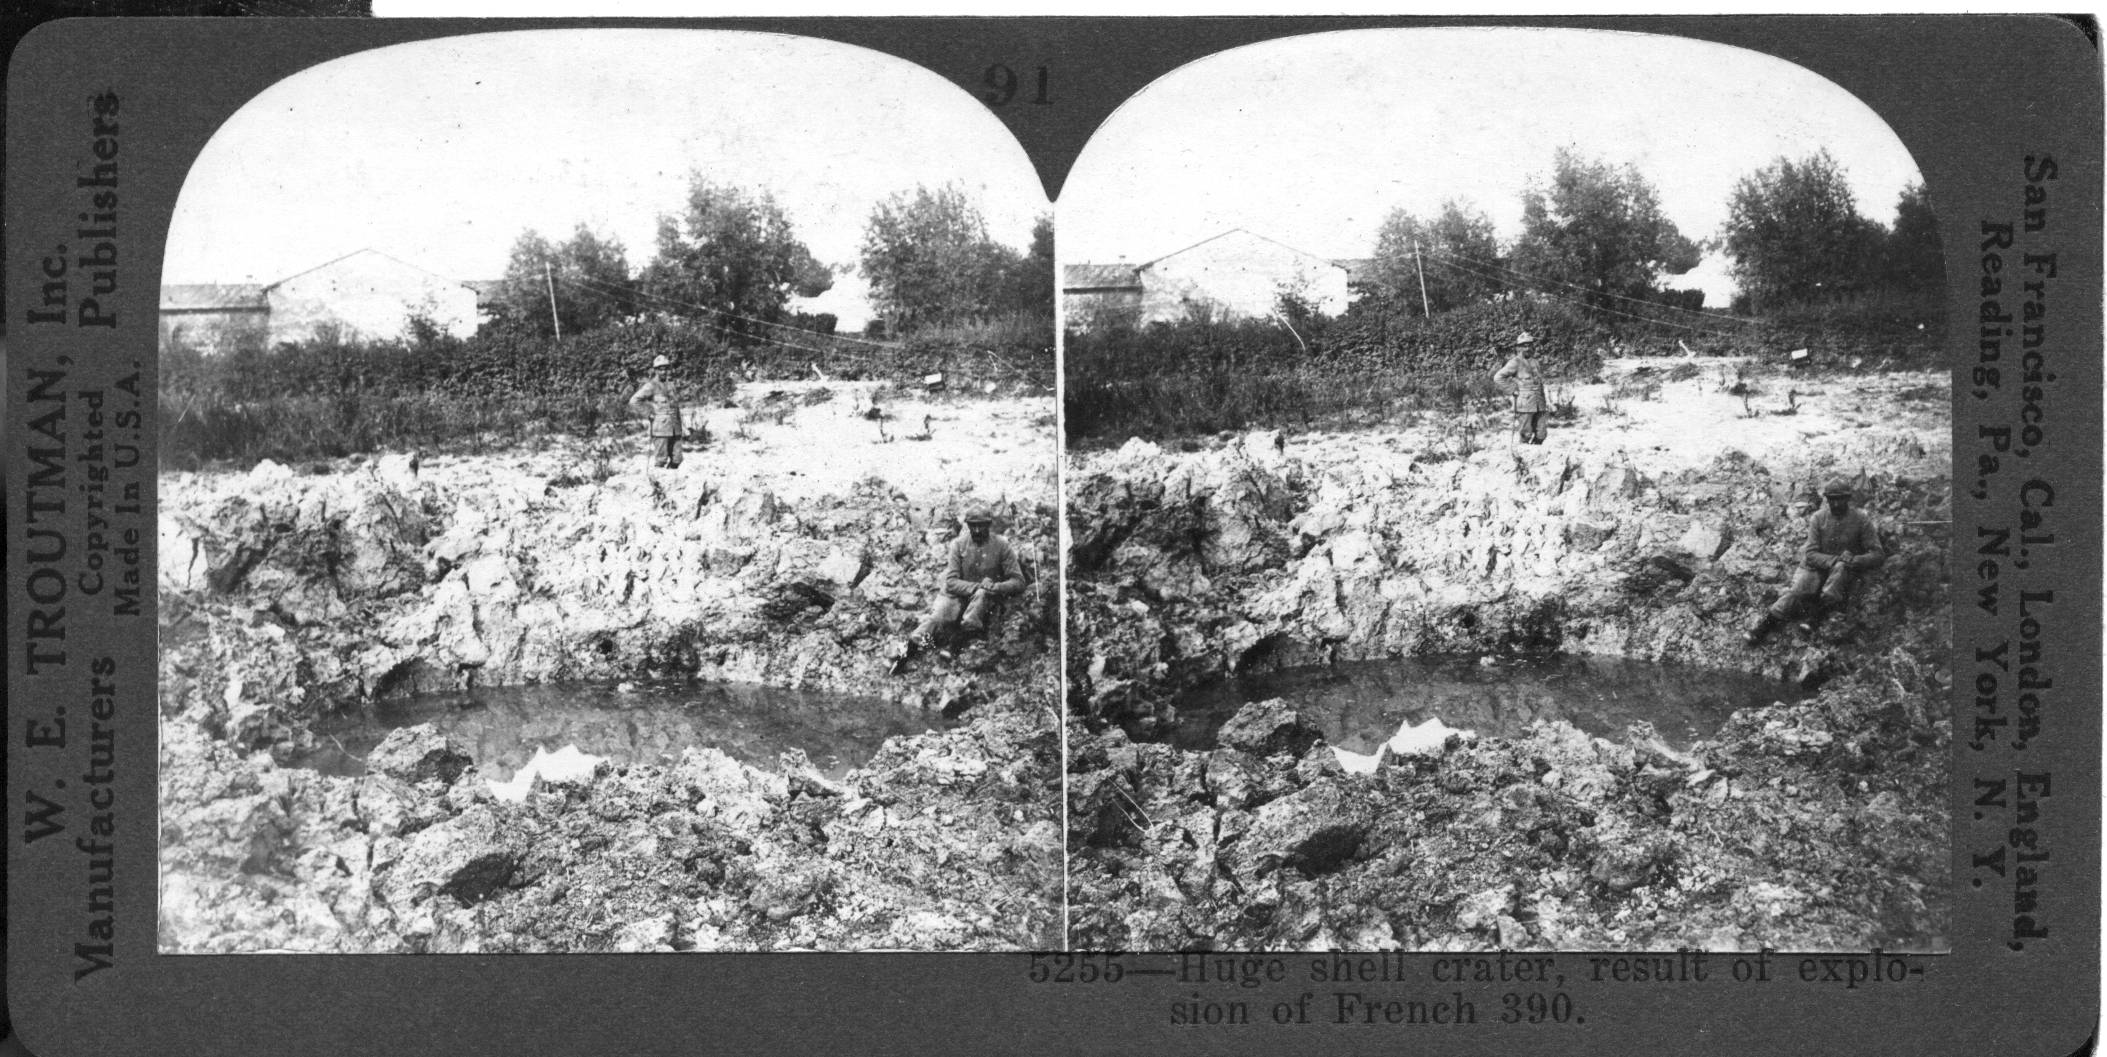 Huge shell crater, result of explosion of French 390